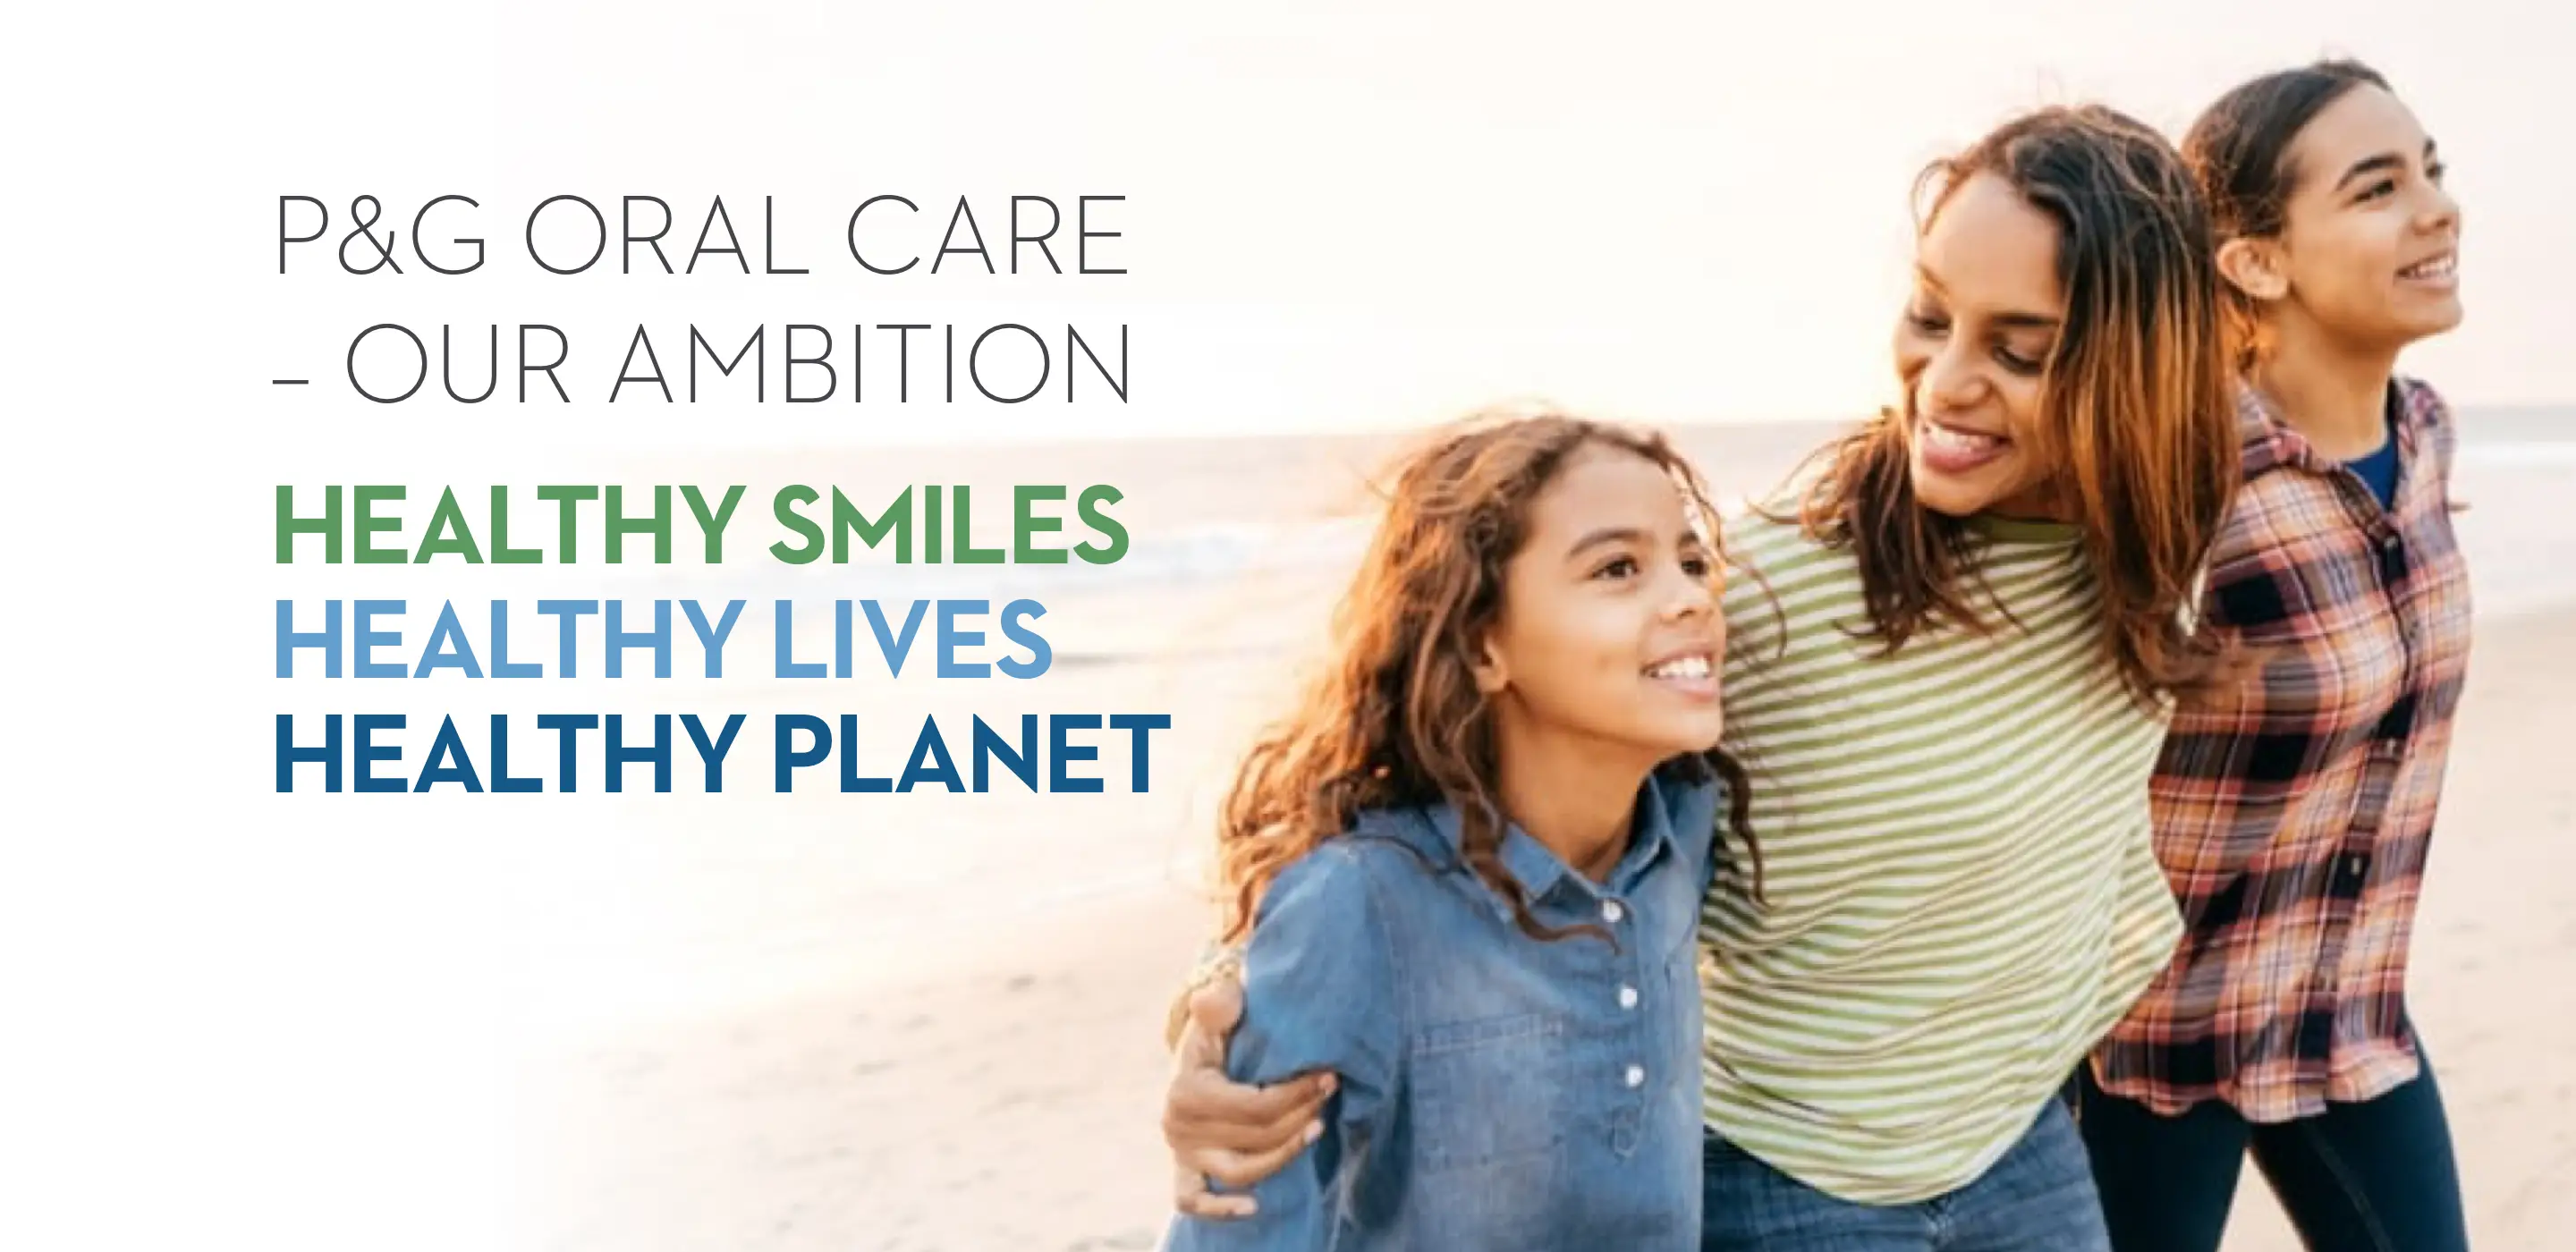 Healthy smiles healthy ives healthy planet banner image 